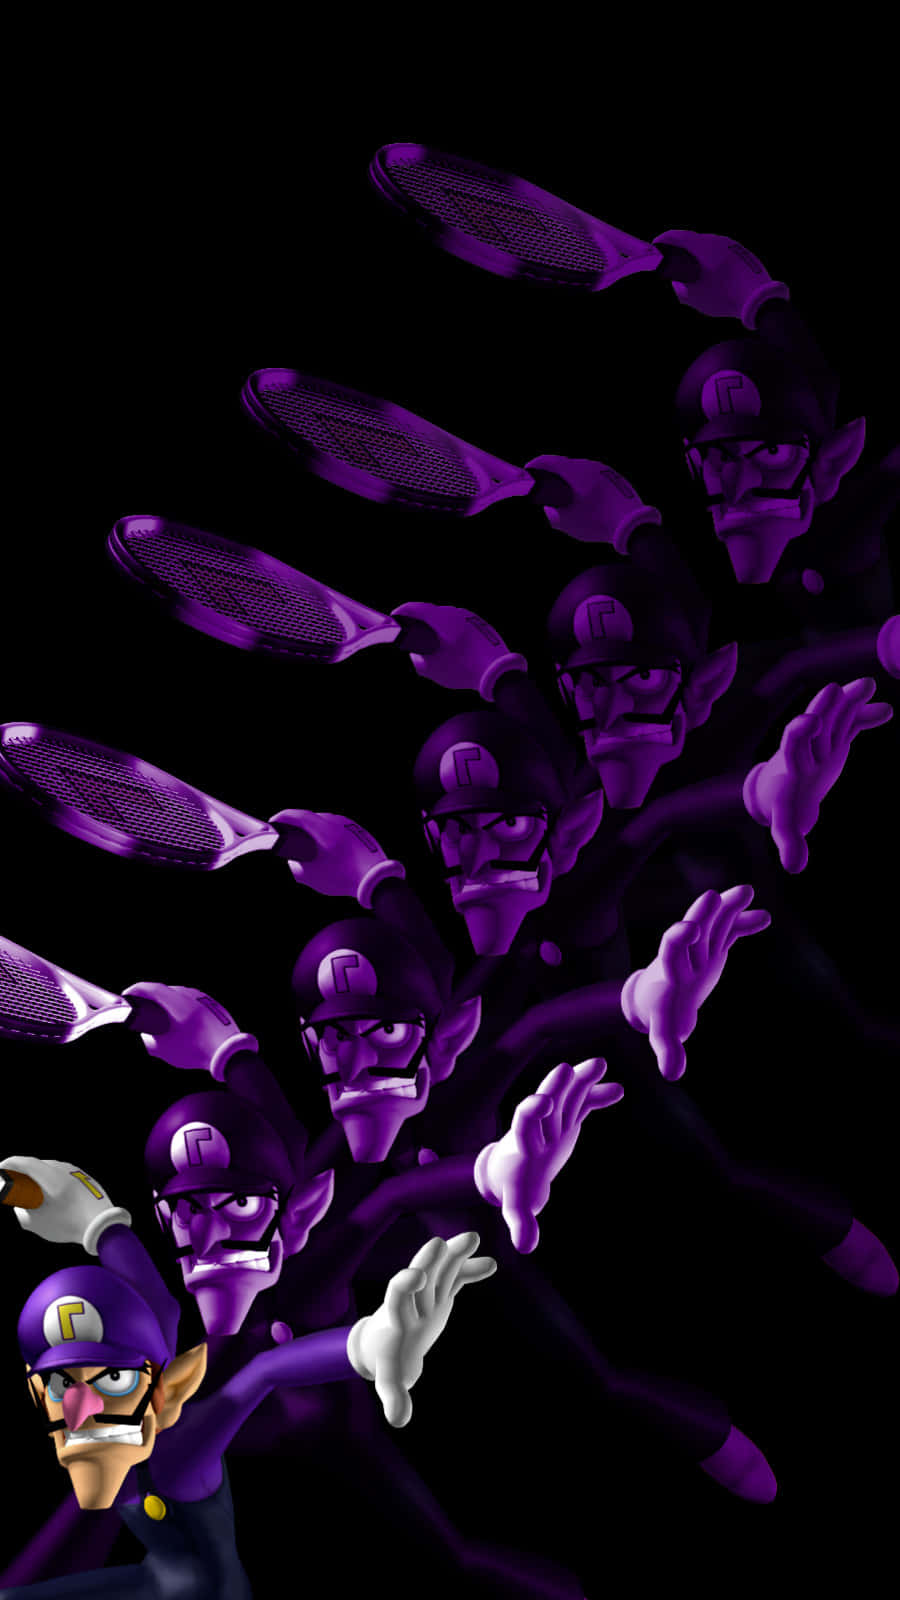 Waluigi Strikes A Pose In His Iconic Purple And Black Outfit. Background